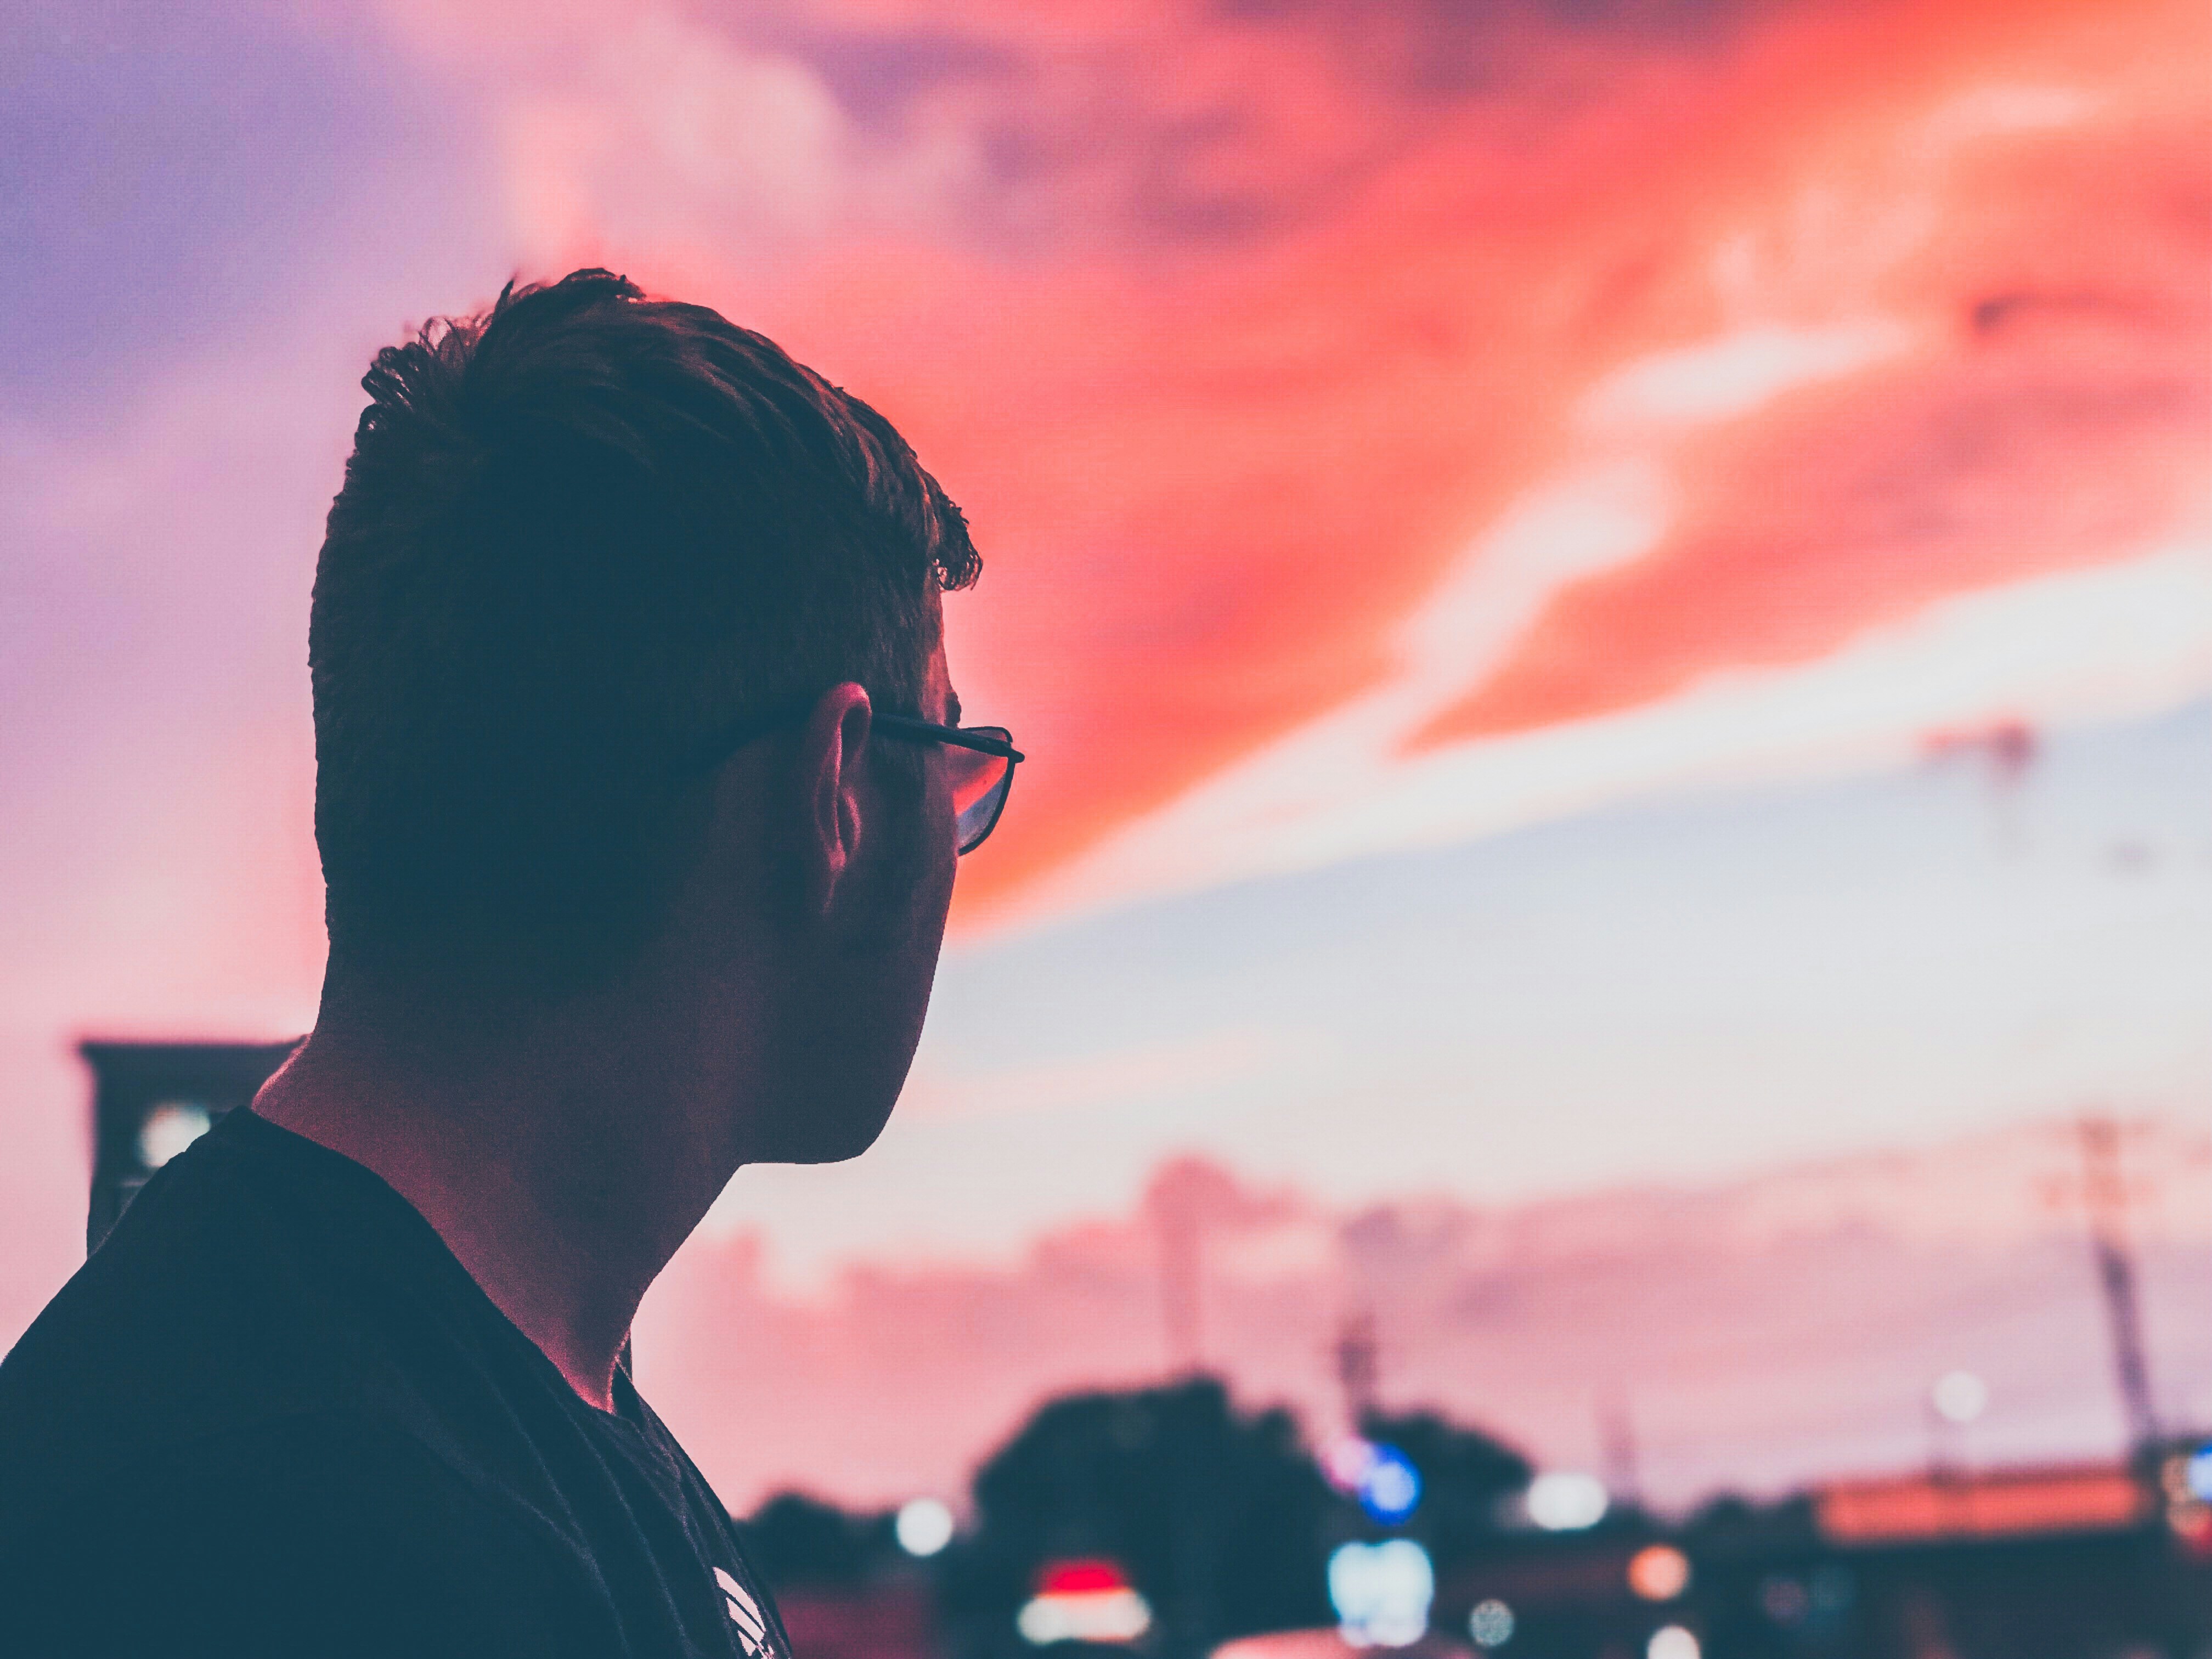 Boy in sunglasses looking off at sunset with cloudy sky in the evening.